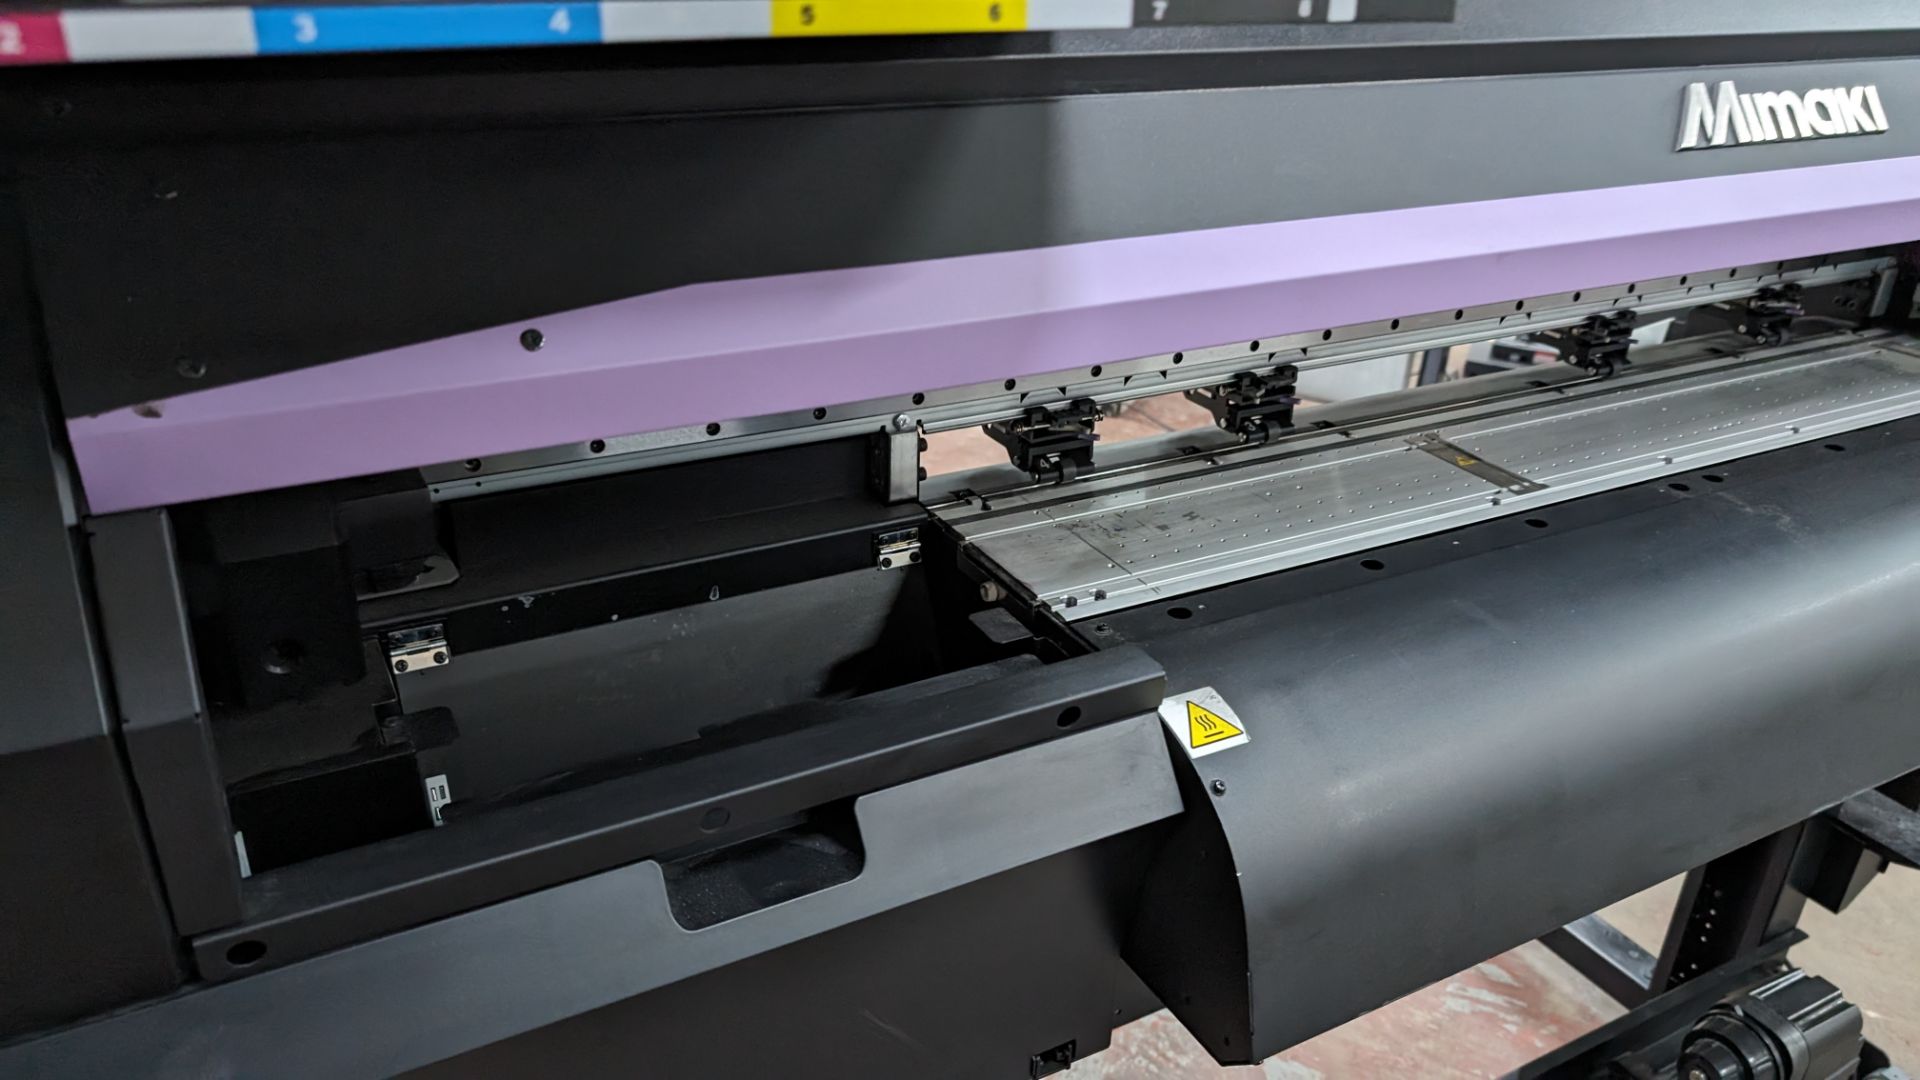 Mimaki CJV150-75 wide format printer including quantity of software as pictured, 800mm max print wid - Image 13 of 21